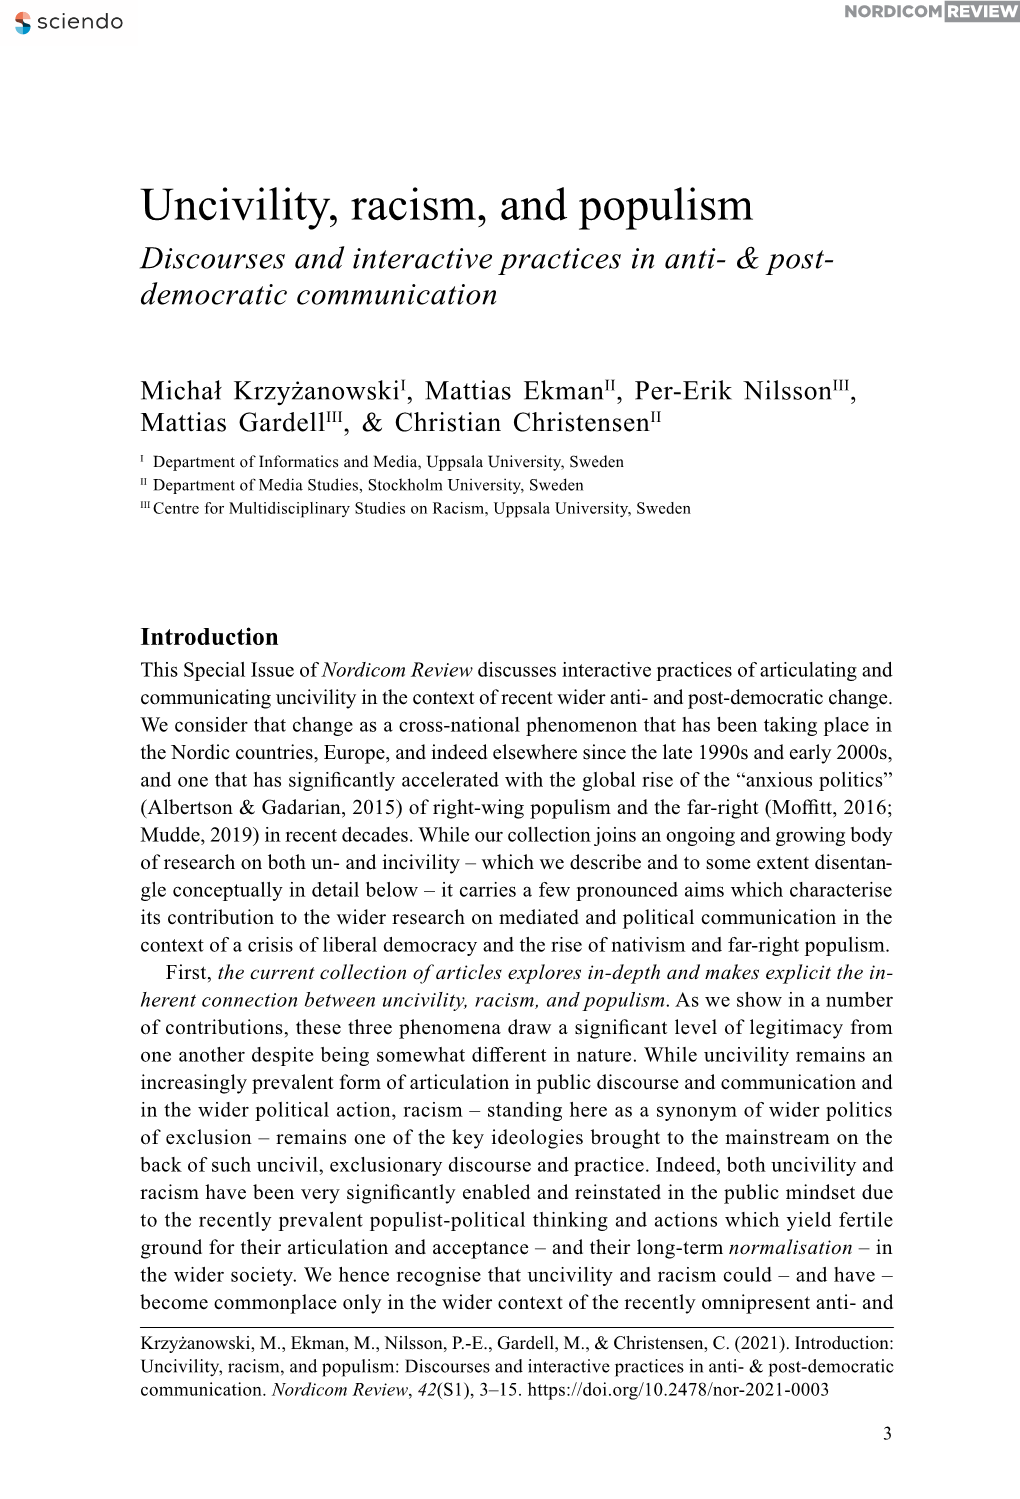 Uncivility, Racism, and Populism Discourses and Interactive Practices in Anti- & Post- Democratic Communication